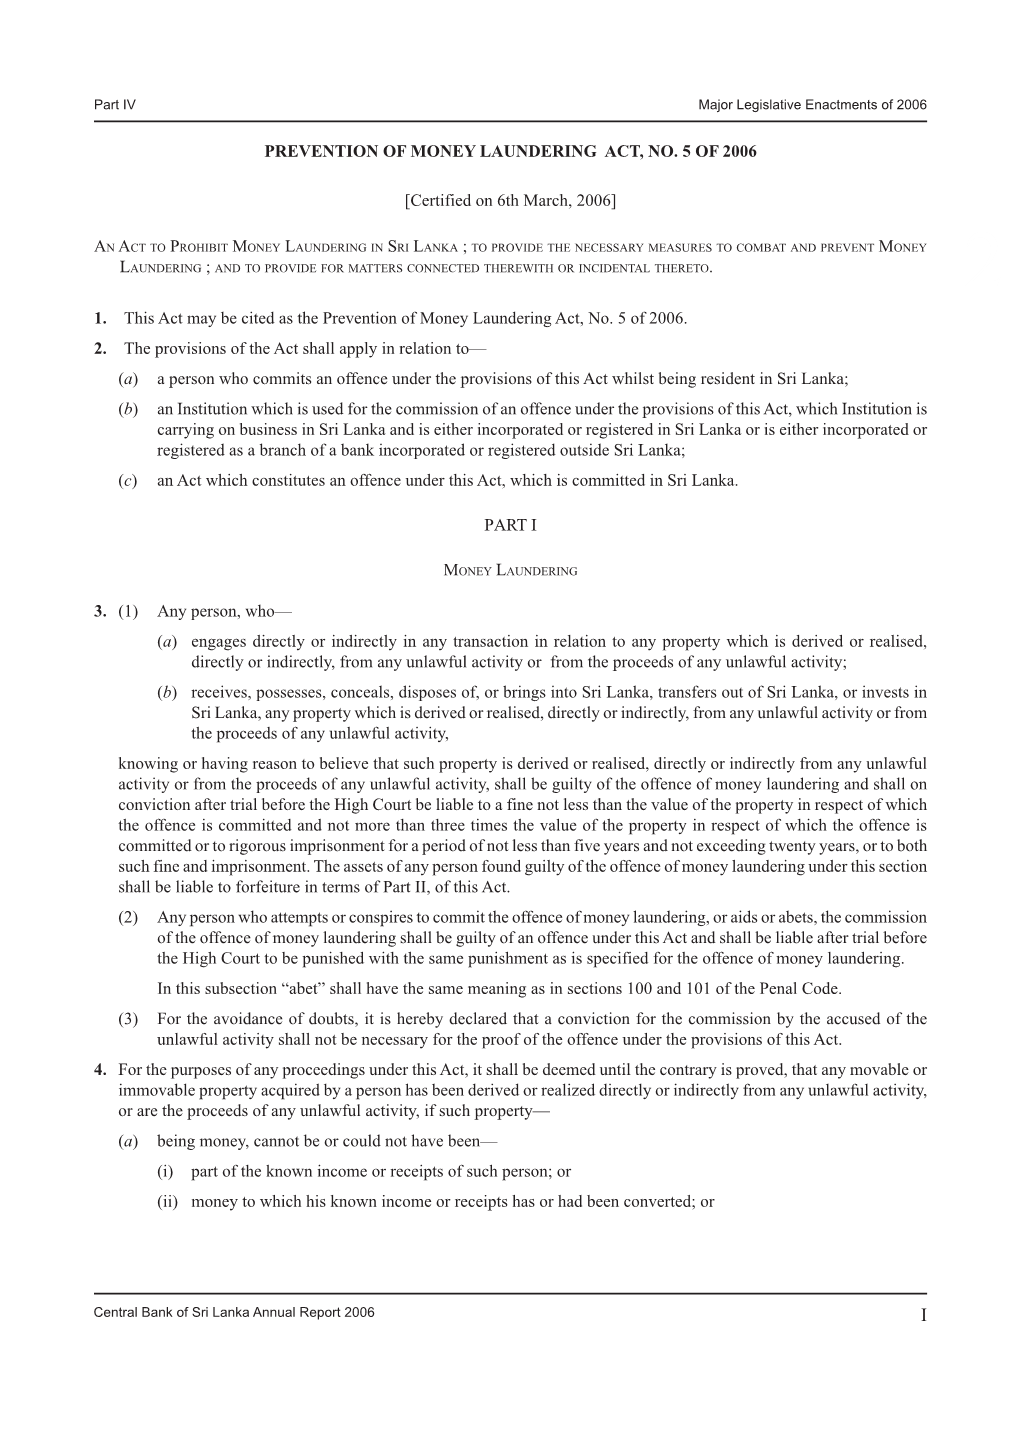 Prevention of Money Laundering Act, No. 5 of 2006